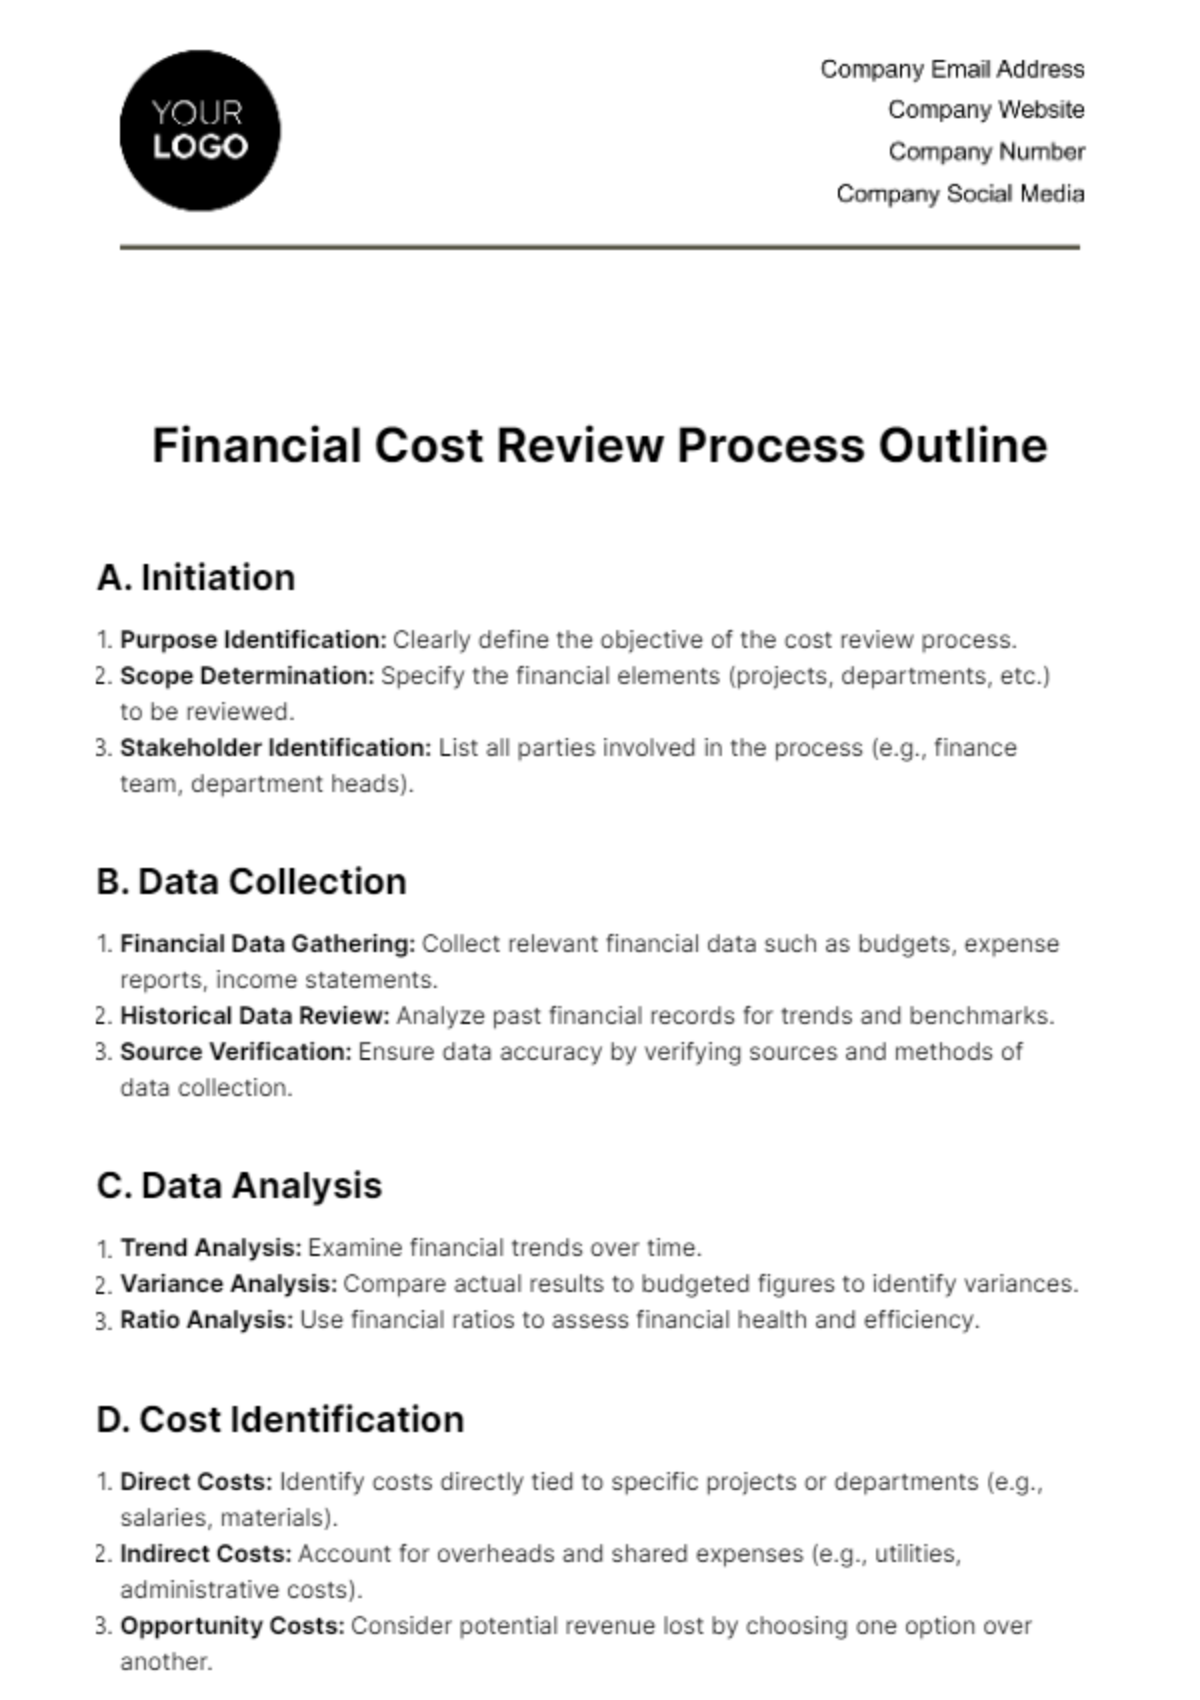 Financial Cost Review Process Outline Template